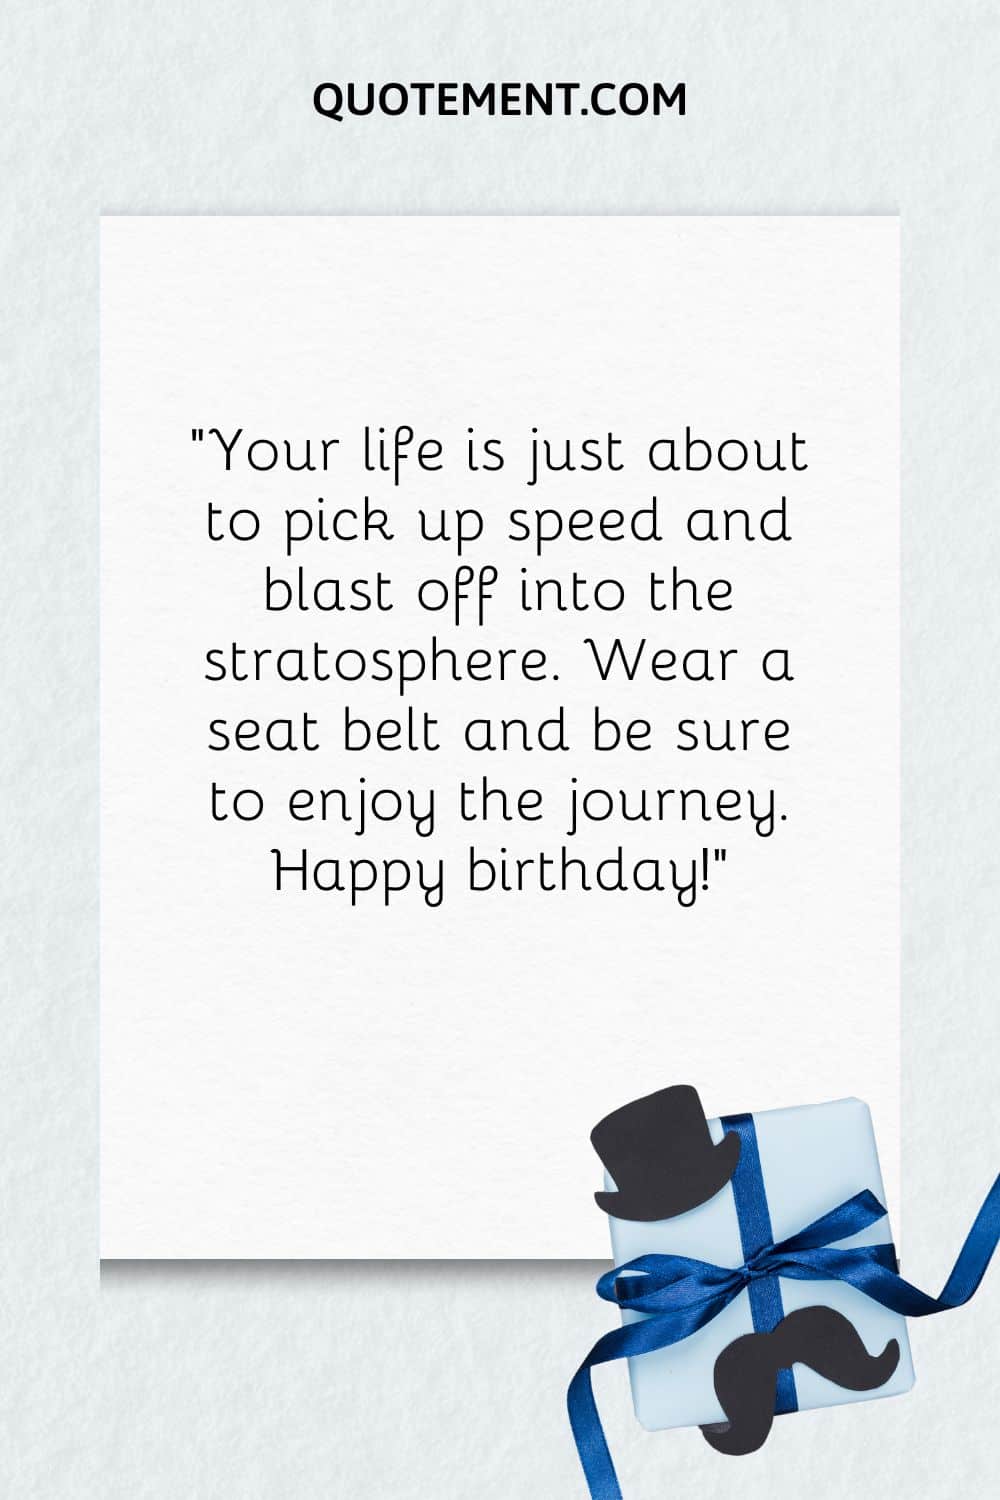 “Your life is just about to pick up speed and blast off into the stratosphere. Wear a seat belt and be sure to enjoy the journey. Happy birthday!”